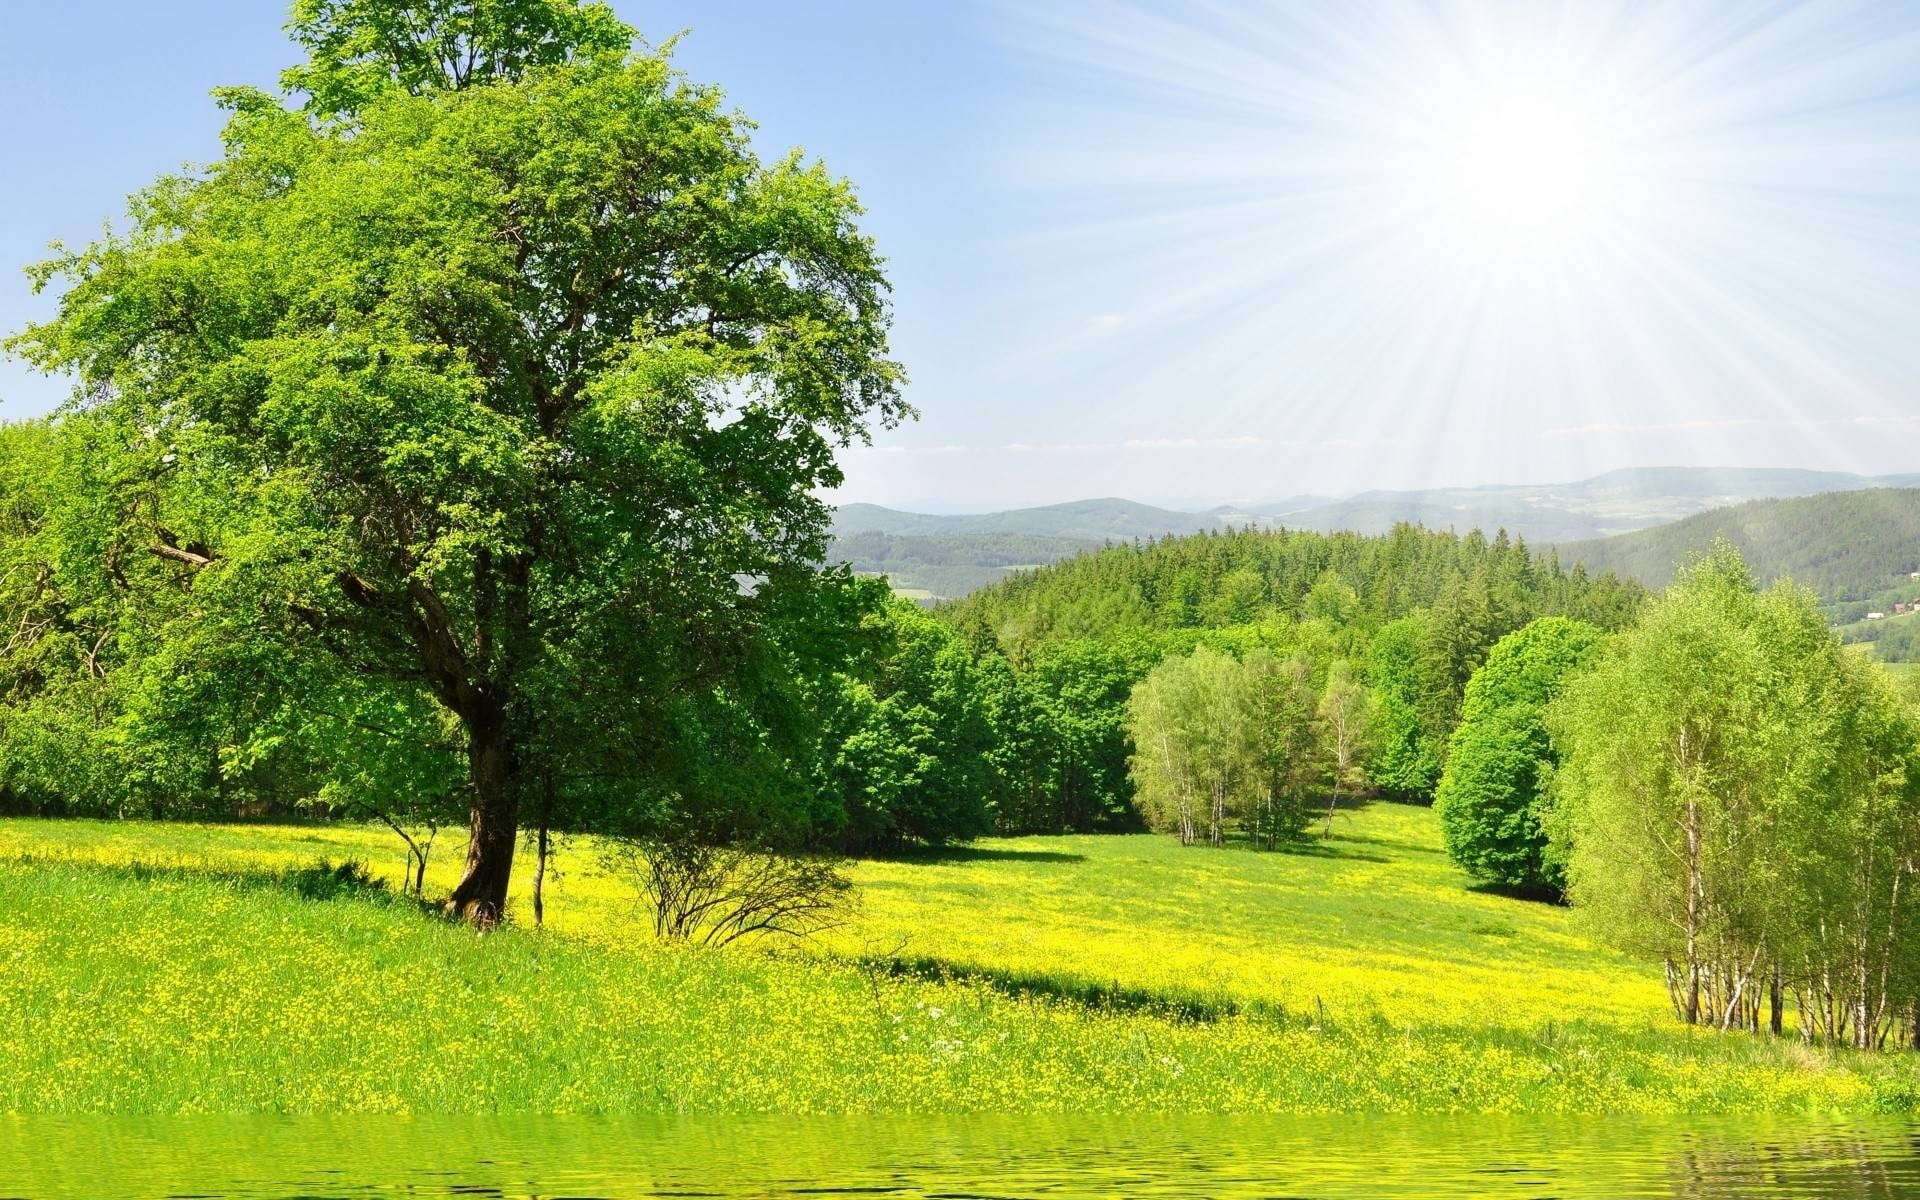 1600x900 resolution | green leaved trees and grass field under sunny